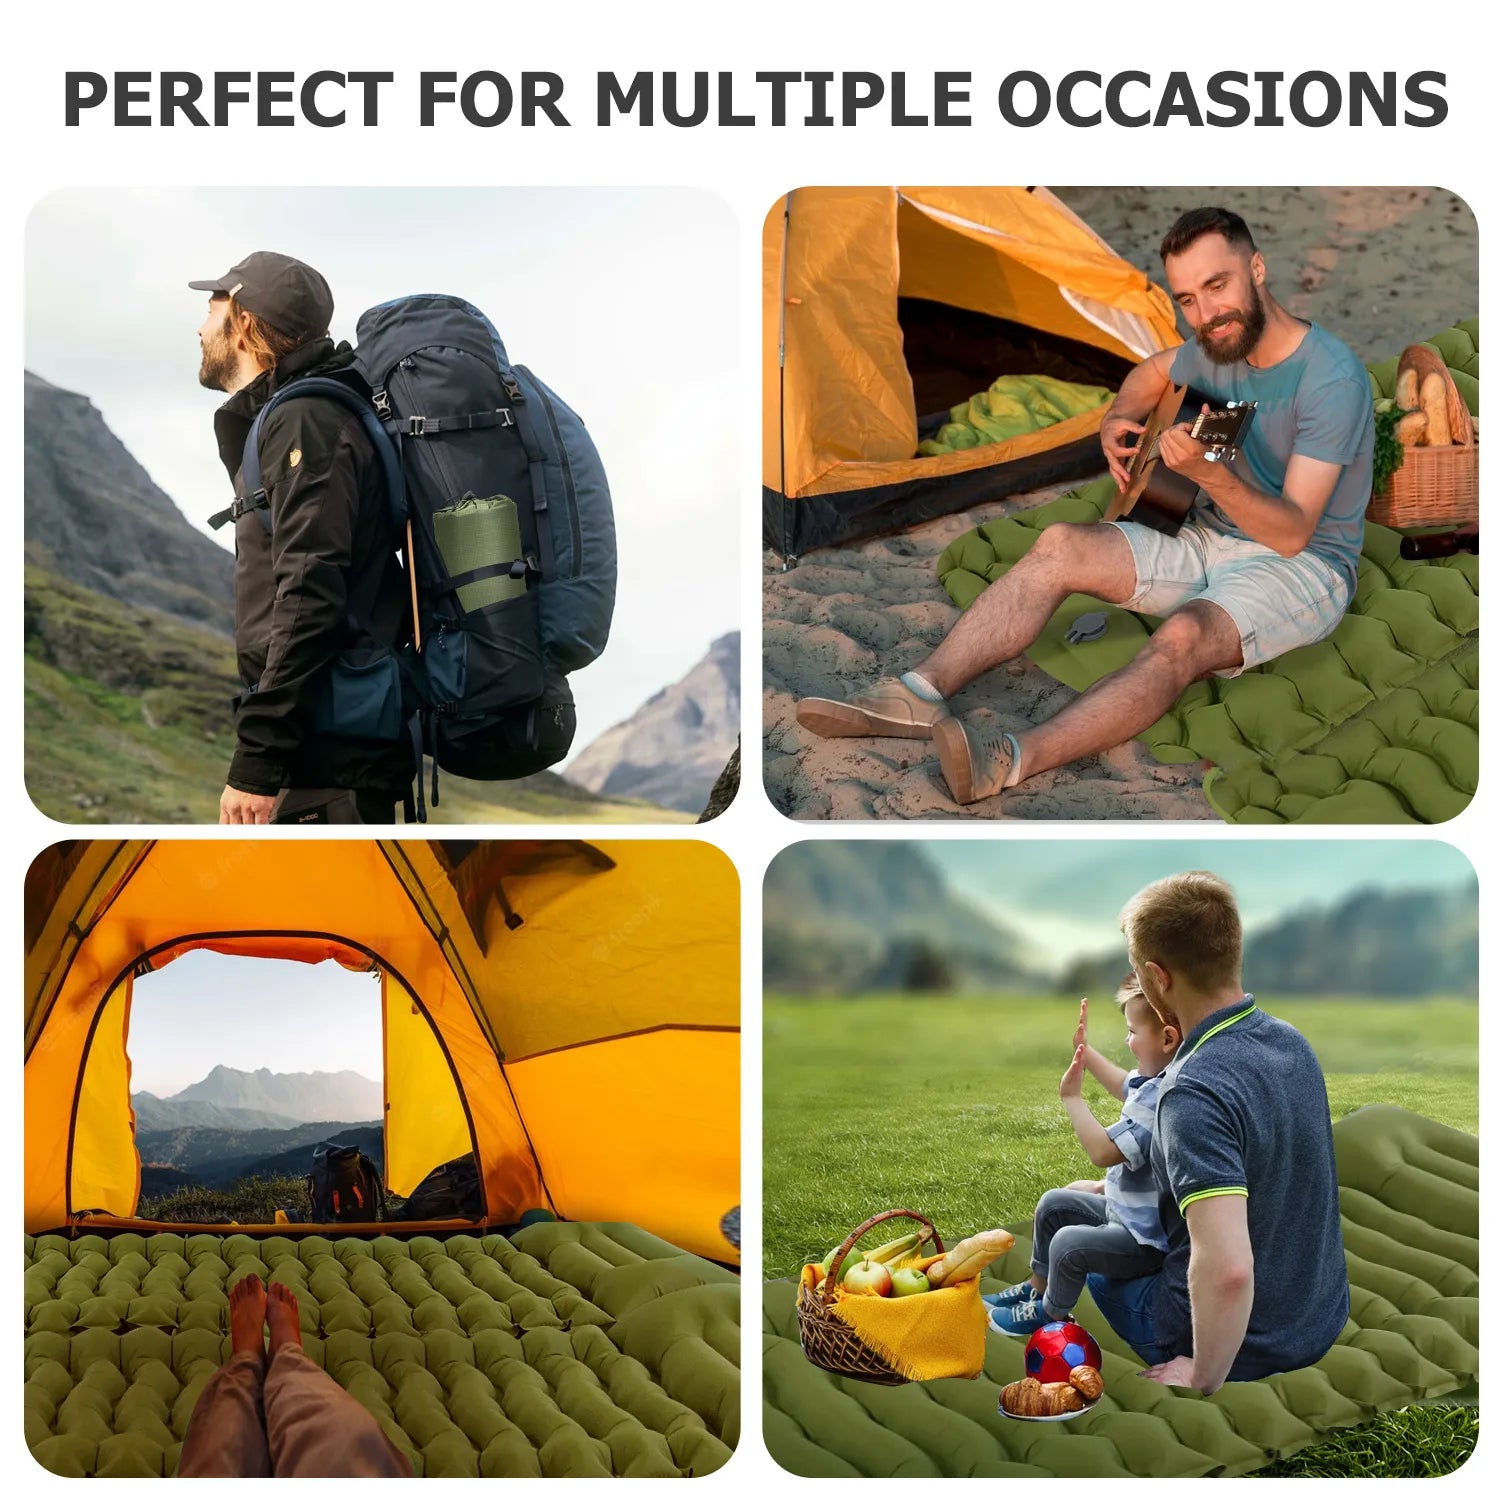 Outdoor Thick Camping Mattress Ultralight Inflatable Sleeping Pad with Built-in Pillow & Pump Air Mat for Hiking Backpacking